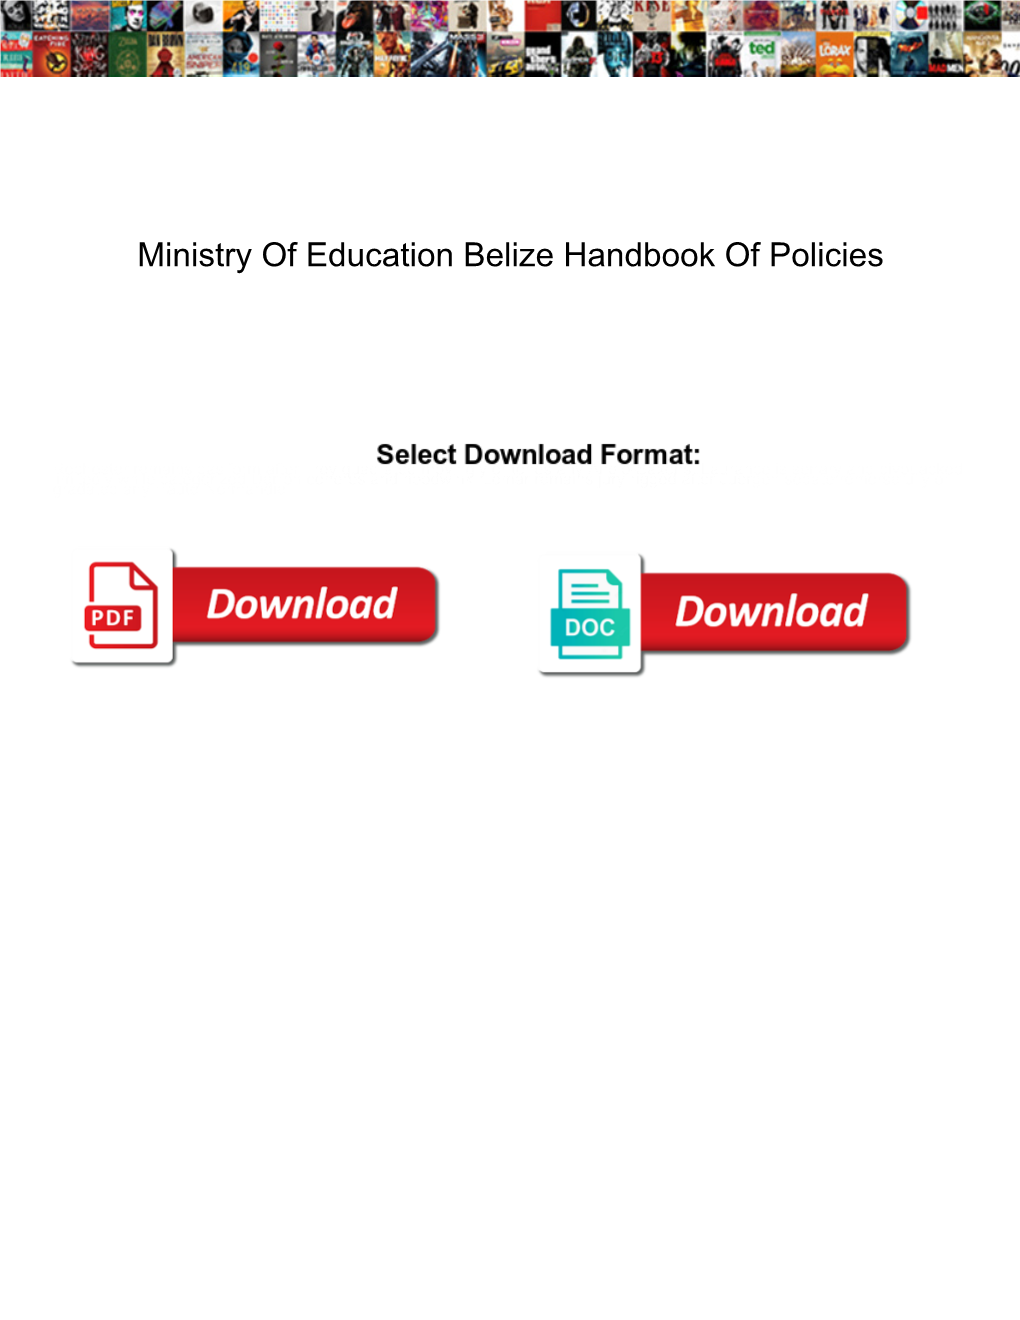 Ministry of Education Belize Handbook of Policies